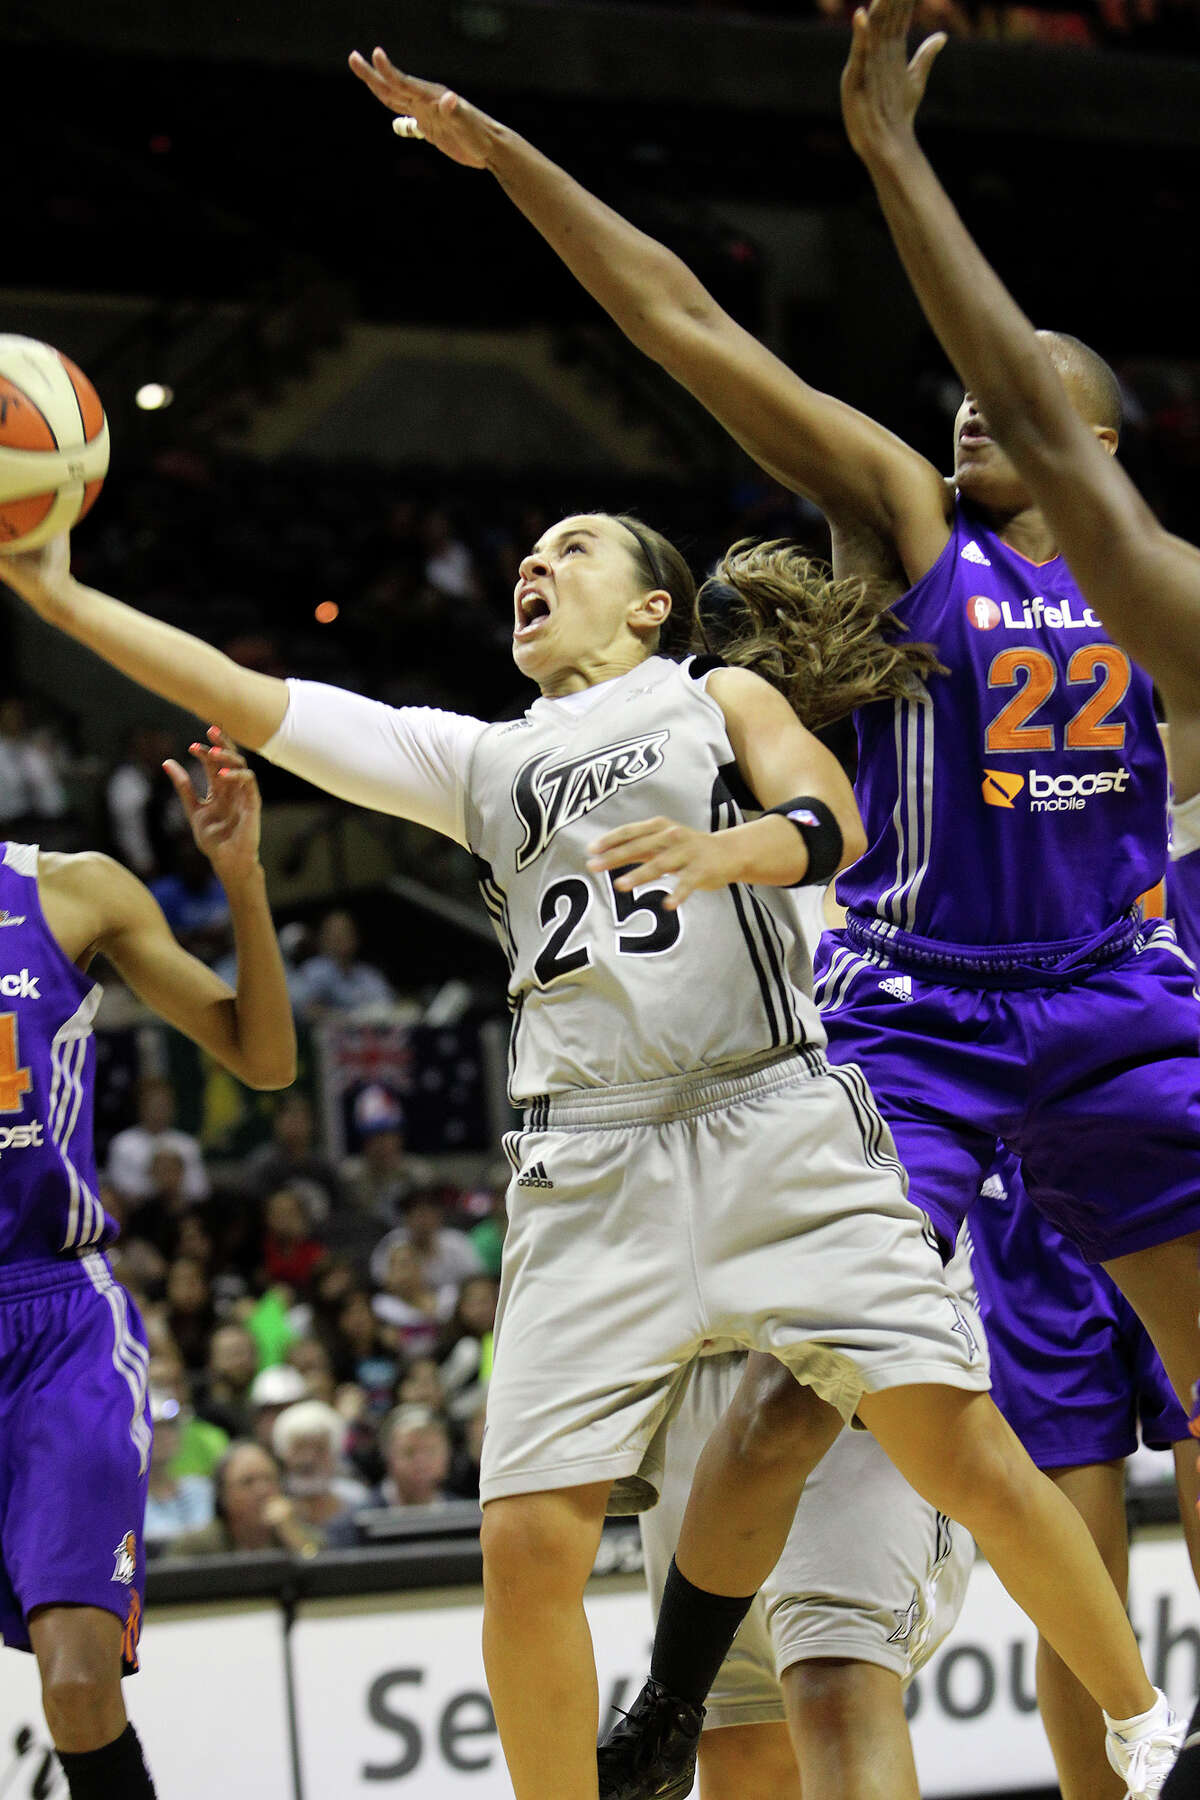 Becky Hammon finds a way to the hoop in the second half as the Silver Stars host the Phoenix Mercury at the AT&T Center on July 3, 2012.